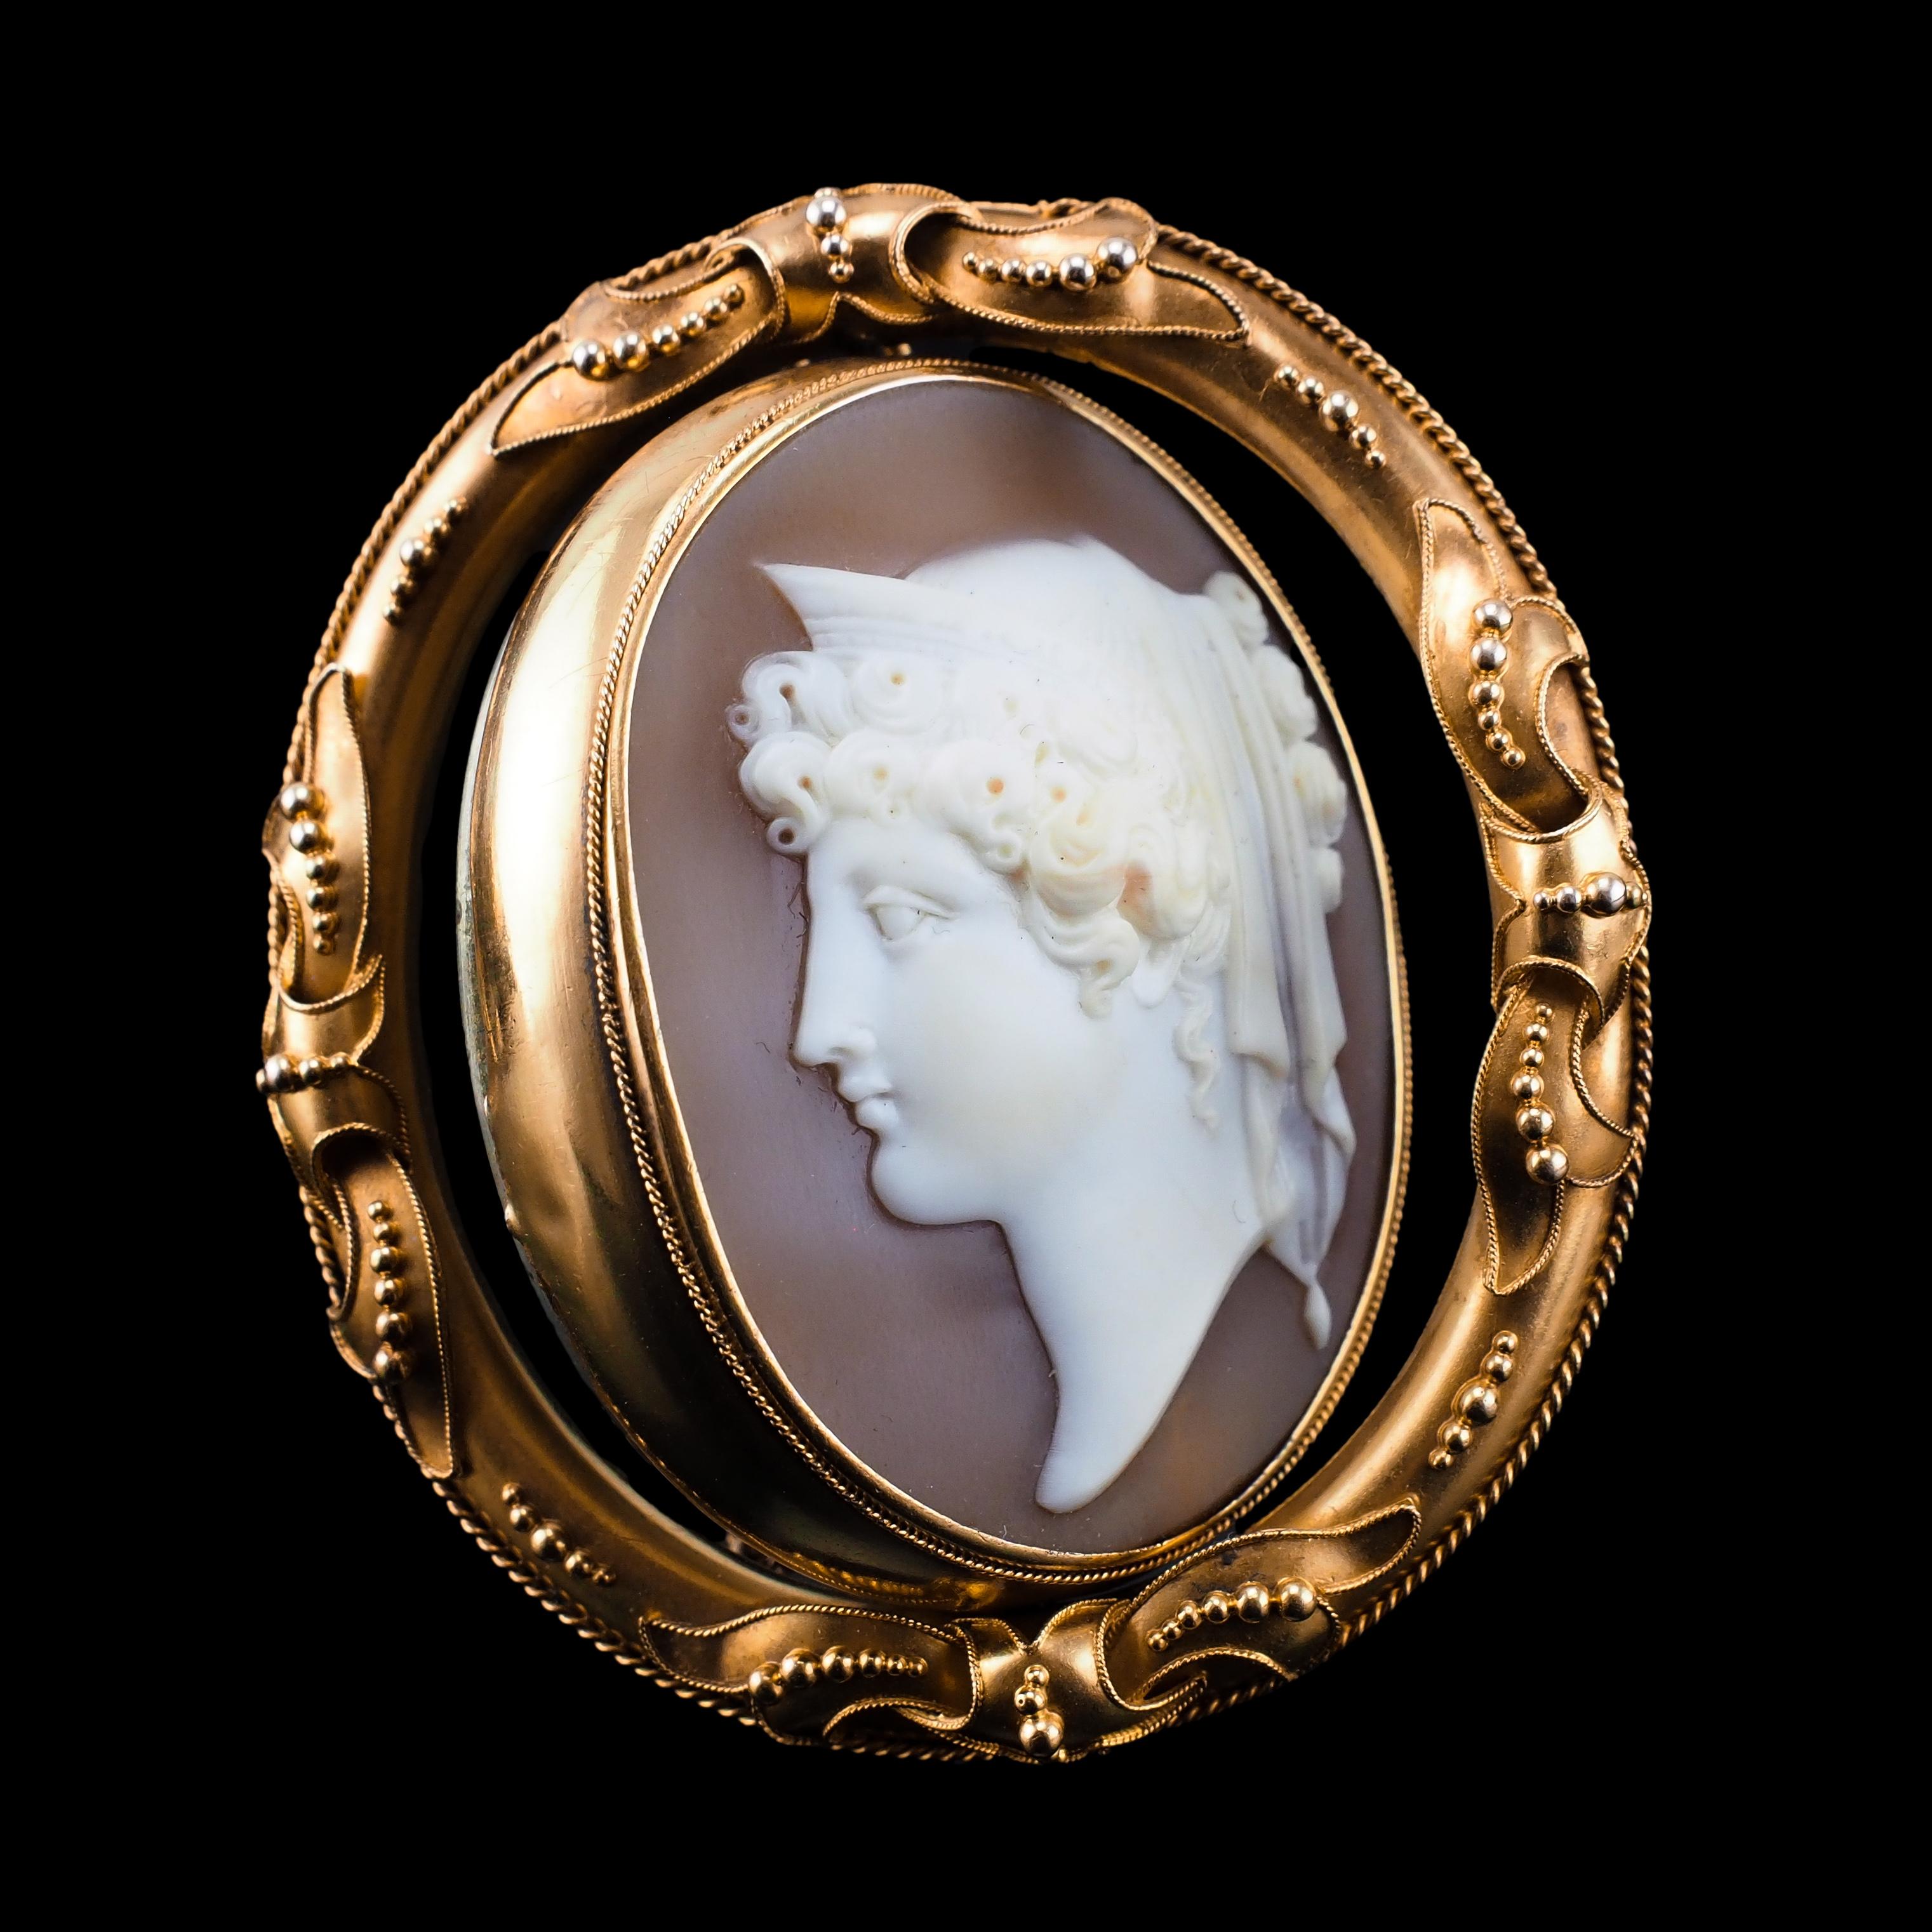 Antique Cameo Brooch Pendant Necklace 18K Gold - Victorian c.1860 For Sale 6